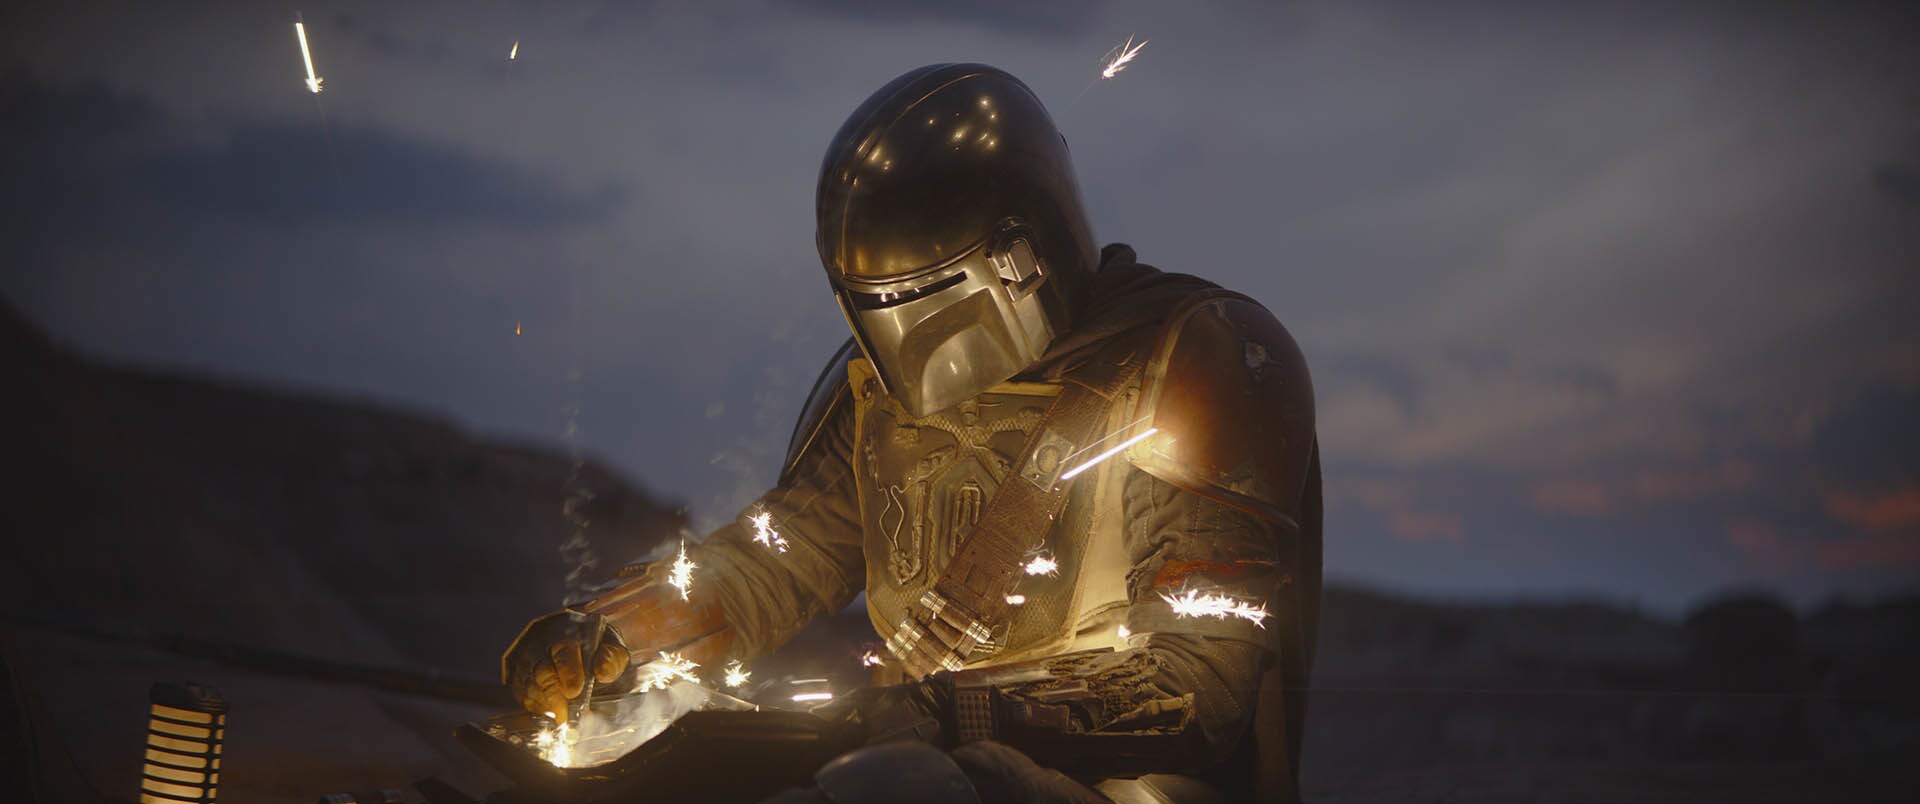 Night falls. The Mandalorian sets up camp, then tends to his wounds and battle-worn armor. Repeat...